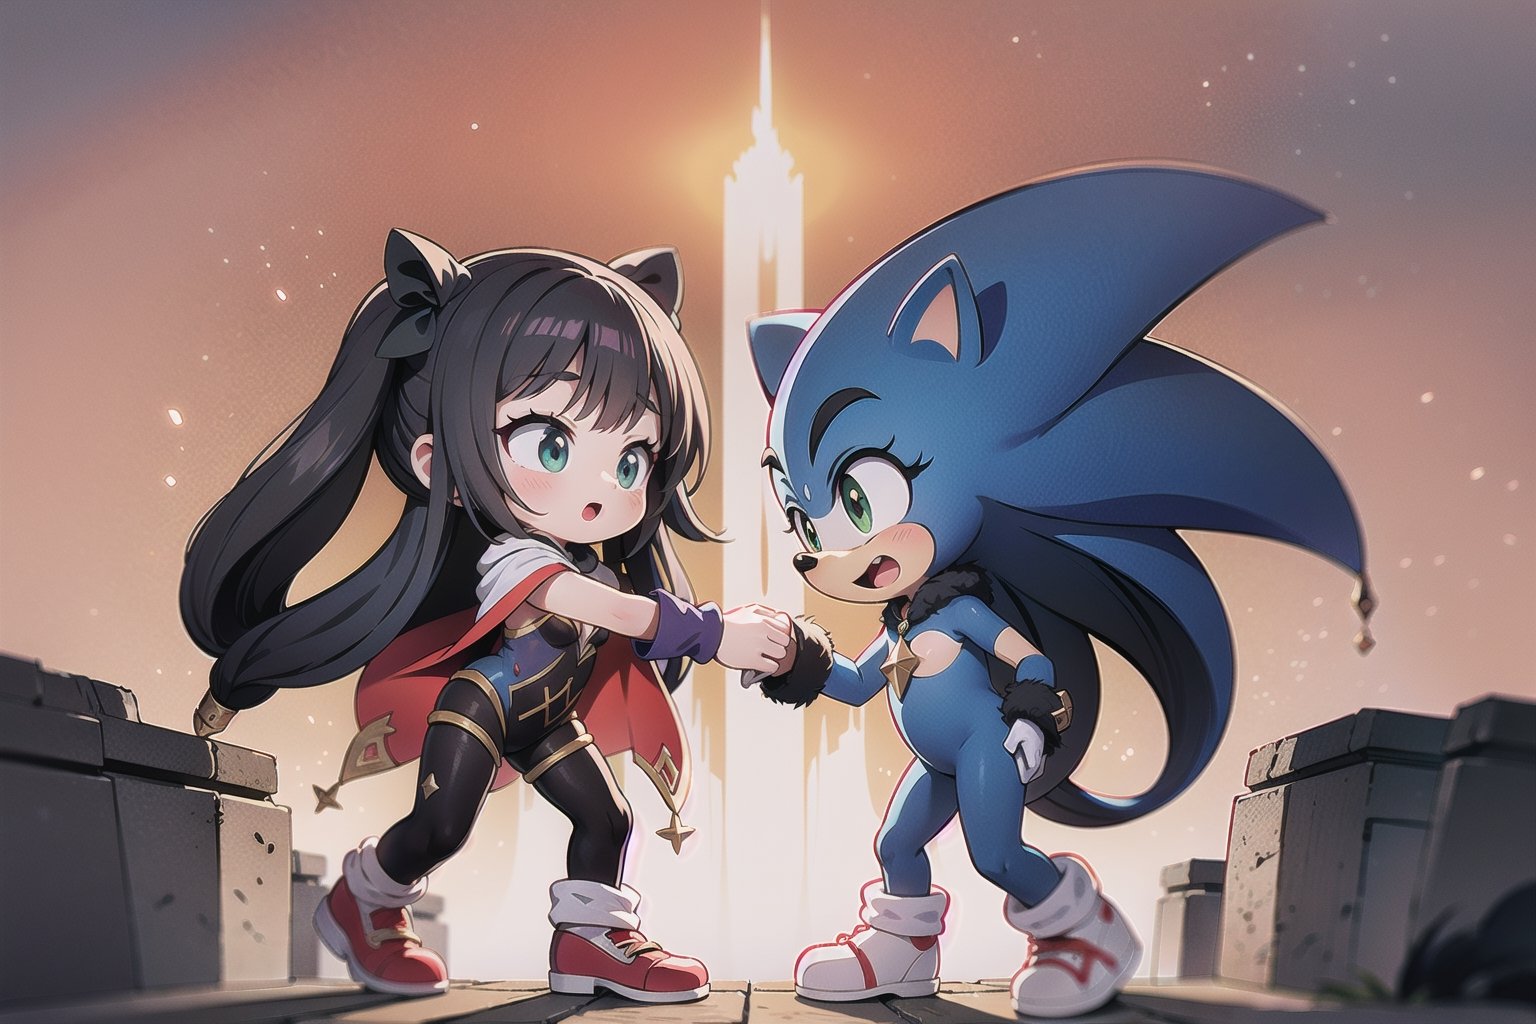 Against the warm glow of Looney's sun-kissed orange sky, Monadef and Sonic the Hedgehog stand united, their dark figures starkly silhouetted against the vibrant backdrop of weathered gray stone, where bright blue spikes and fiery red shoes seem infused with kinetic energy. The characters' forms appear ready to leap into action in breathtaking 32K UHD, as if about to step out of the composition.